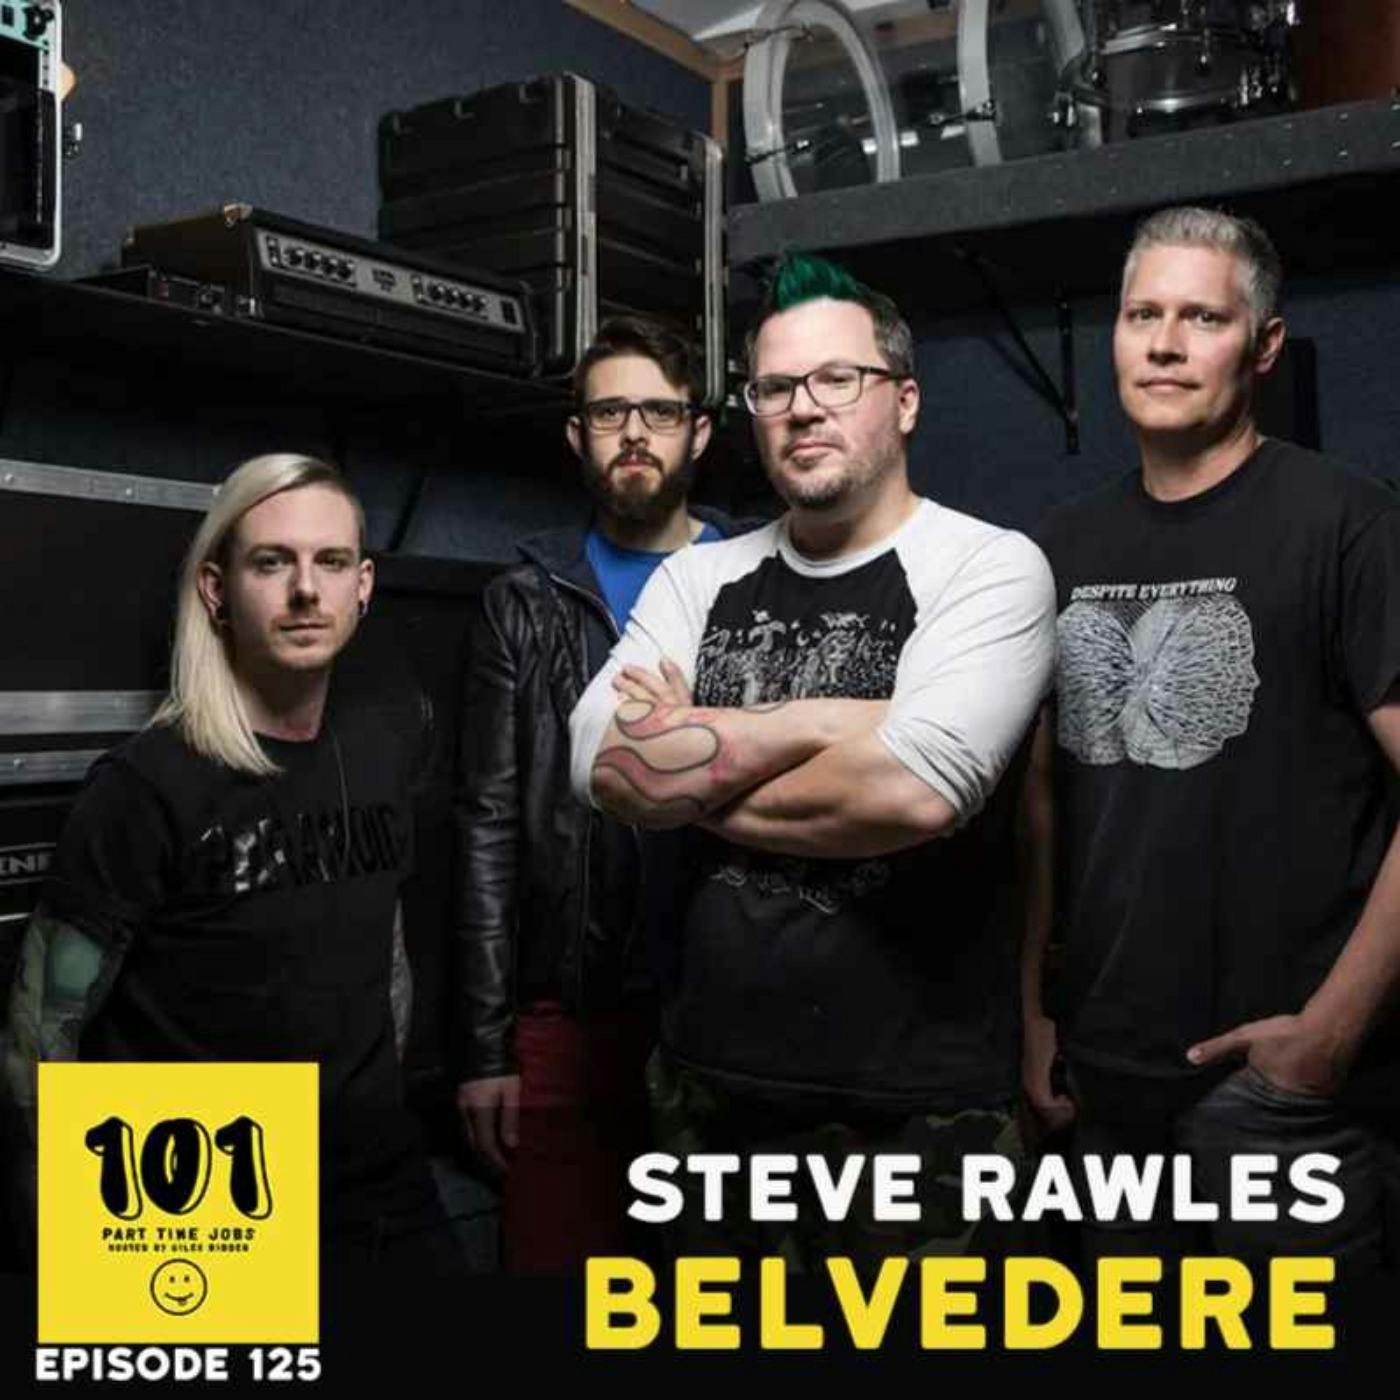 Steve Rawles (Belvedere, This Is A Standoff)